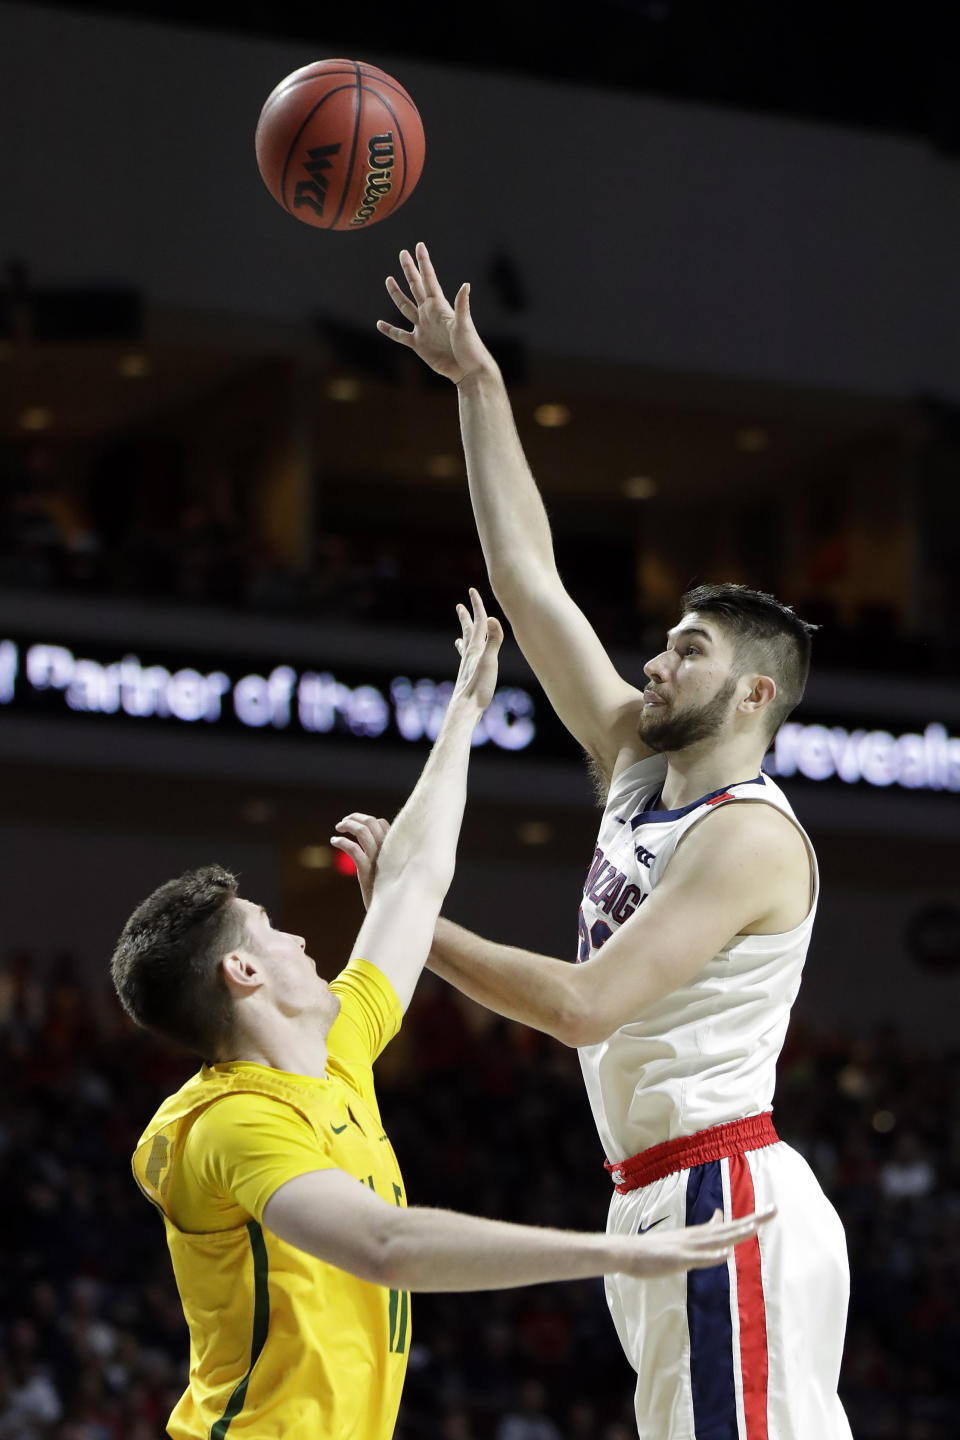 Gonzaga's Killian Tillie, right, shoots as San Francisco's Remu Raitanen defends during the first half of an NCAA college basketball game in the West Coast Conference men's tournament Monday, March 9, 2020, in Las Vegas. (AP Photo/Isaac Brekken)